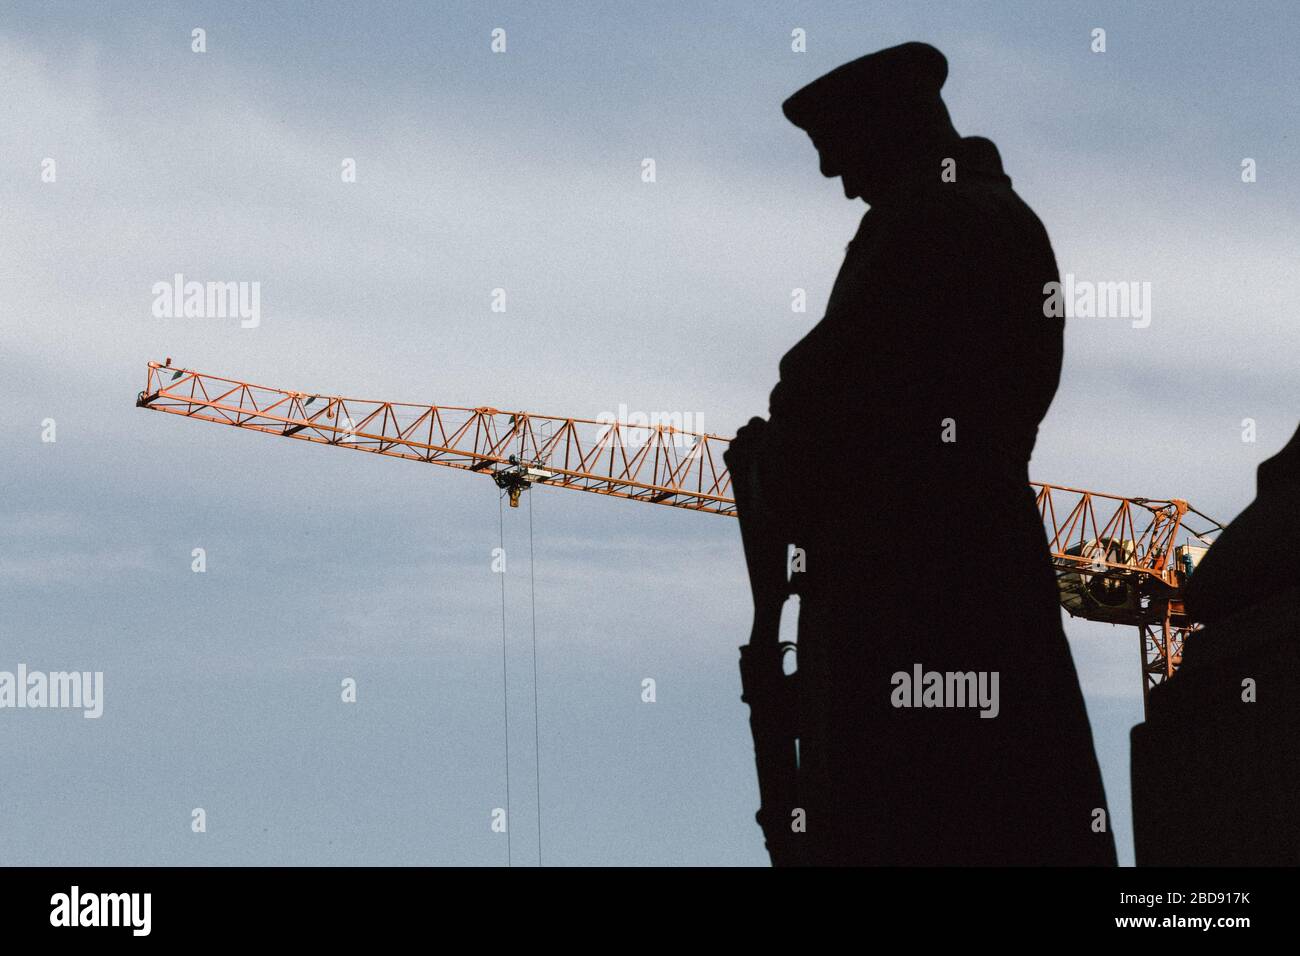 A HS2 construction crane appears behind a silhouette of the War Memorial at Euston Station Stock Photo